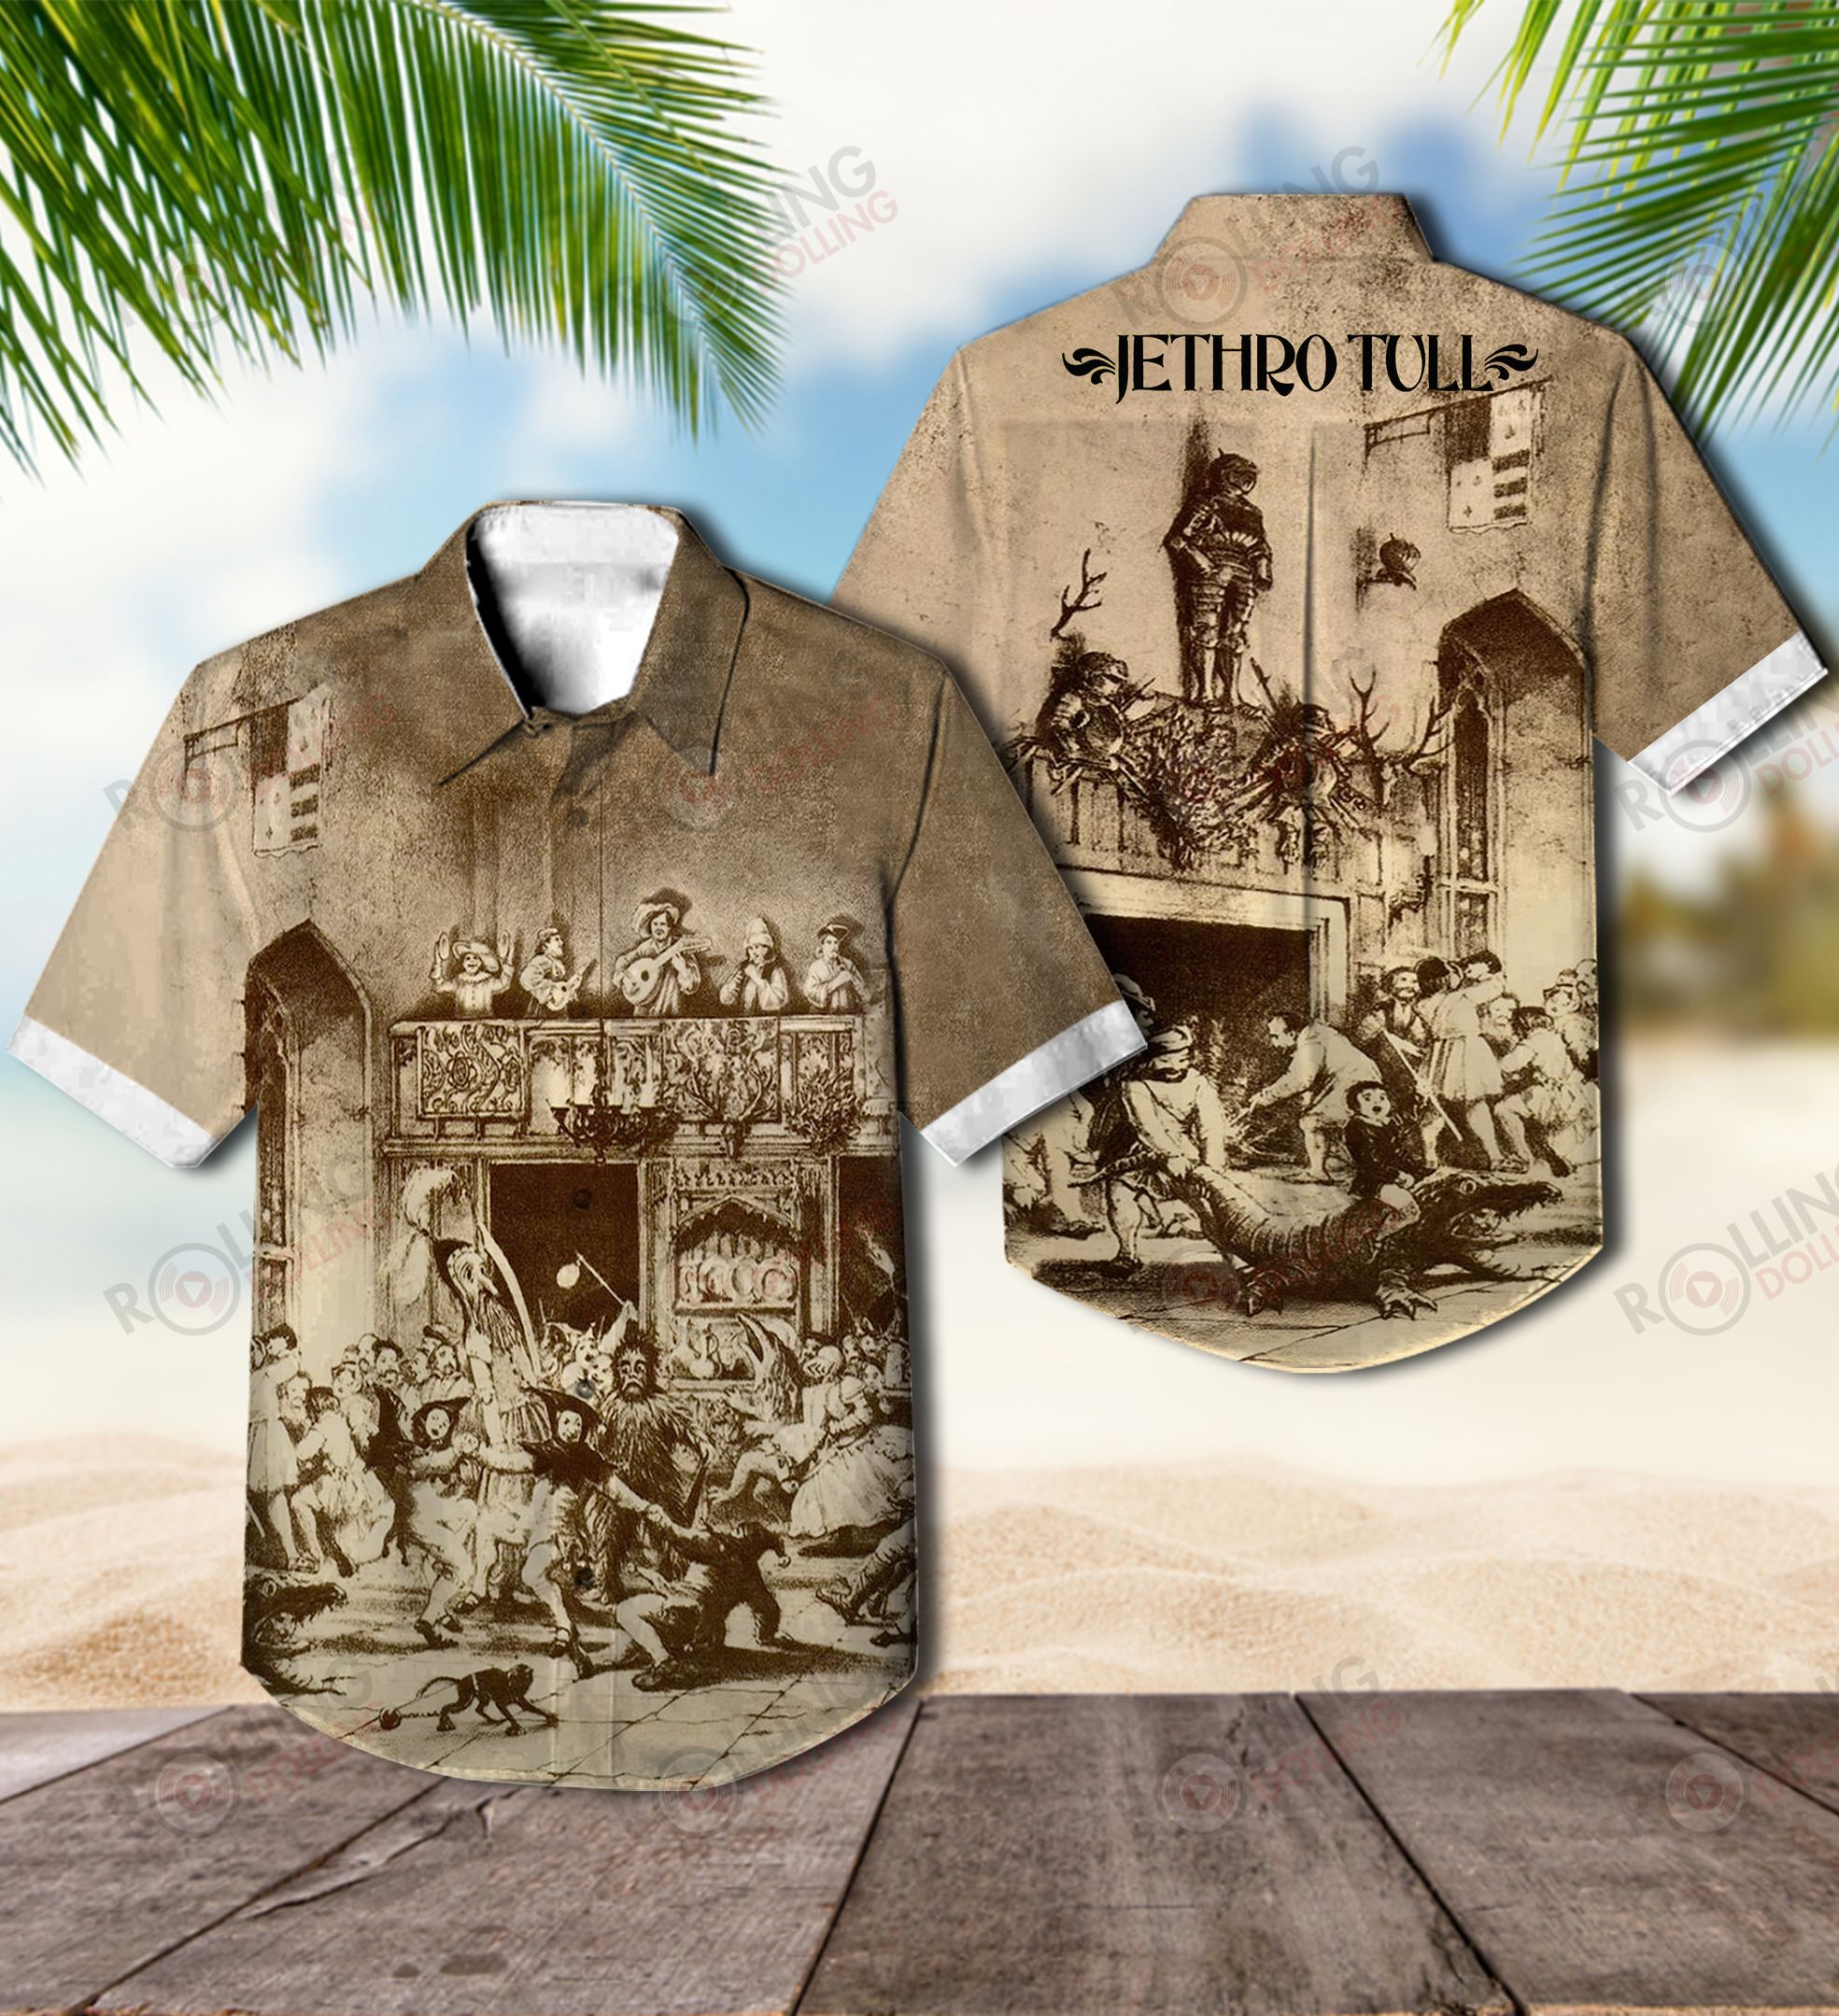 Now you can show off your love of all things band with this Hawaiian Shirt 171